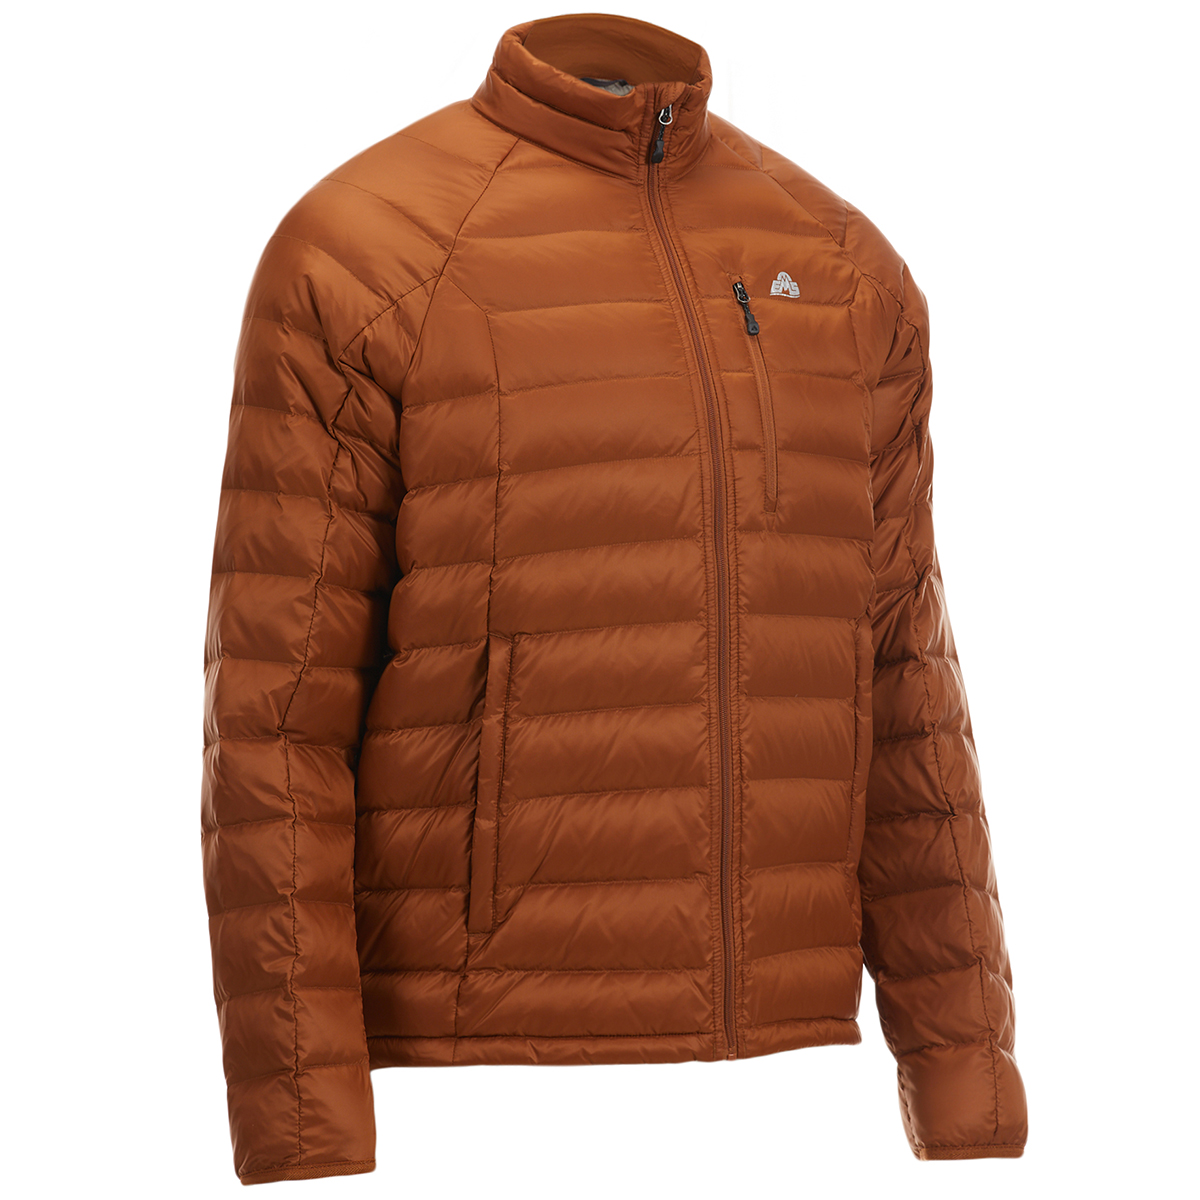 Ems Men's Feather Pack Jacket